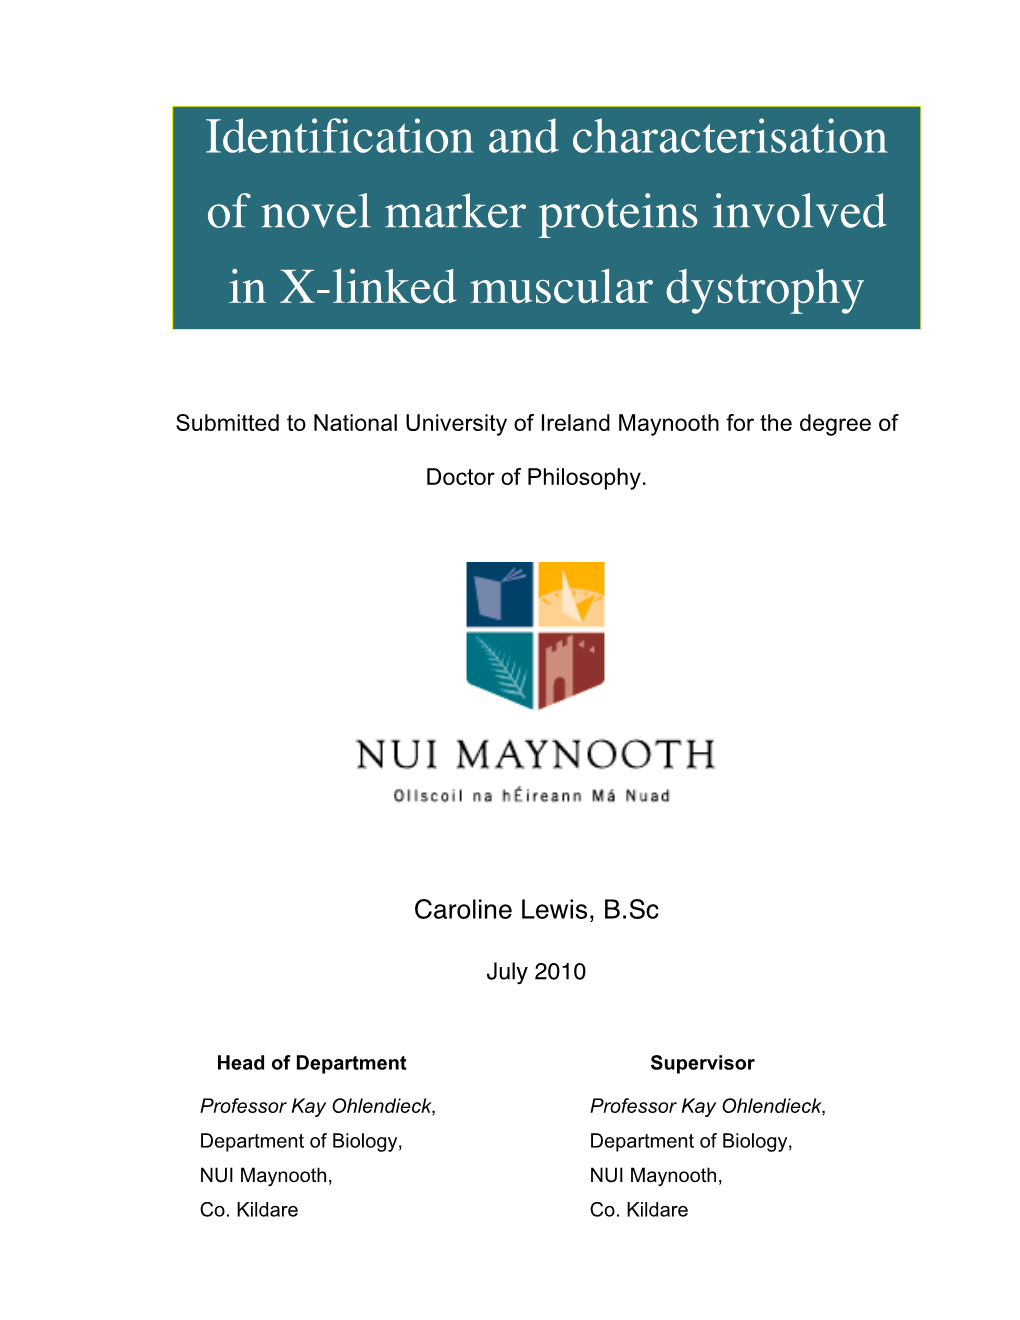 Identification and Characterisation of Novel Marker Proteins Involved in X-Linked Muscular Dystrophy